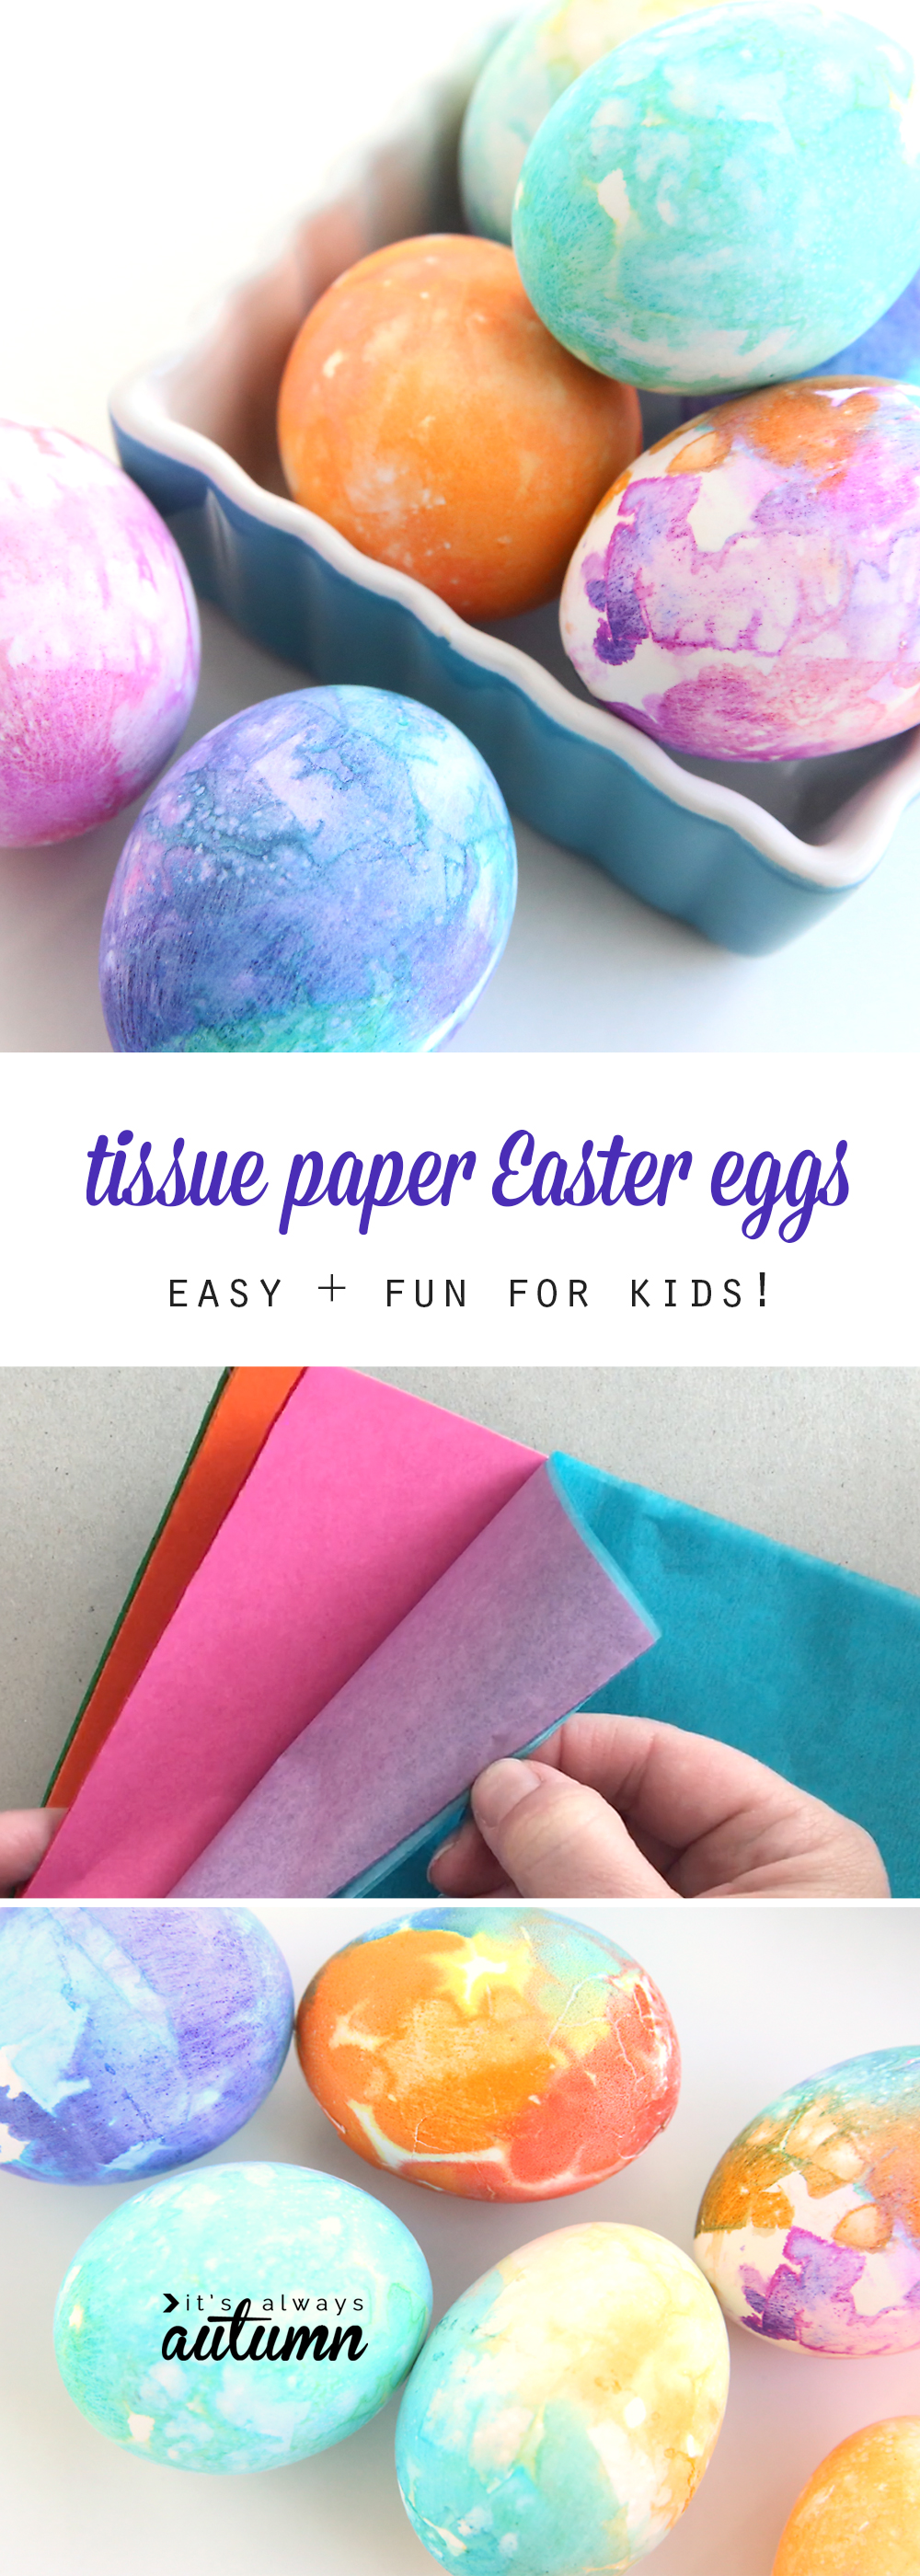 Tissue paper decorated Easter eggs; colorful tissue paper